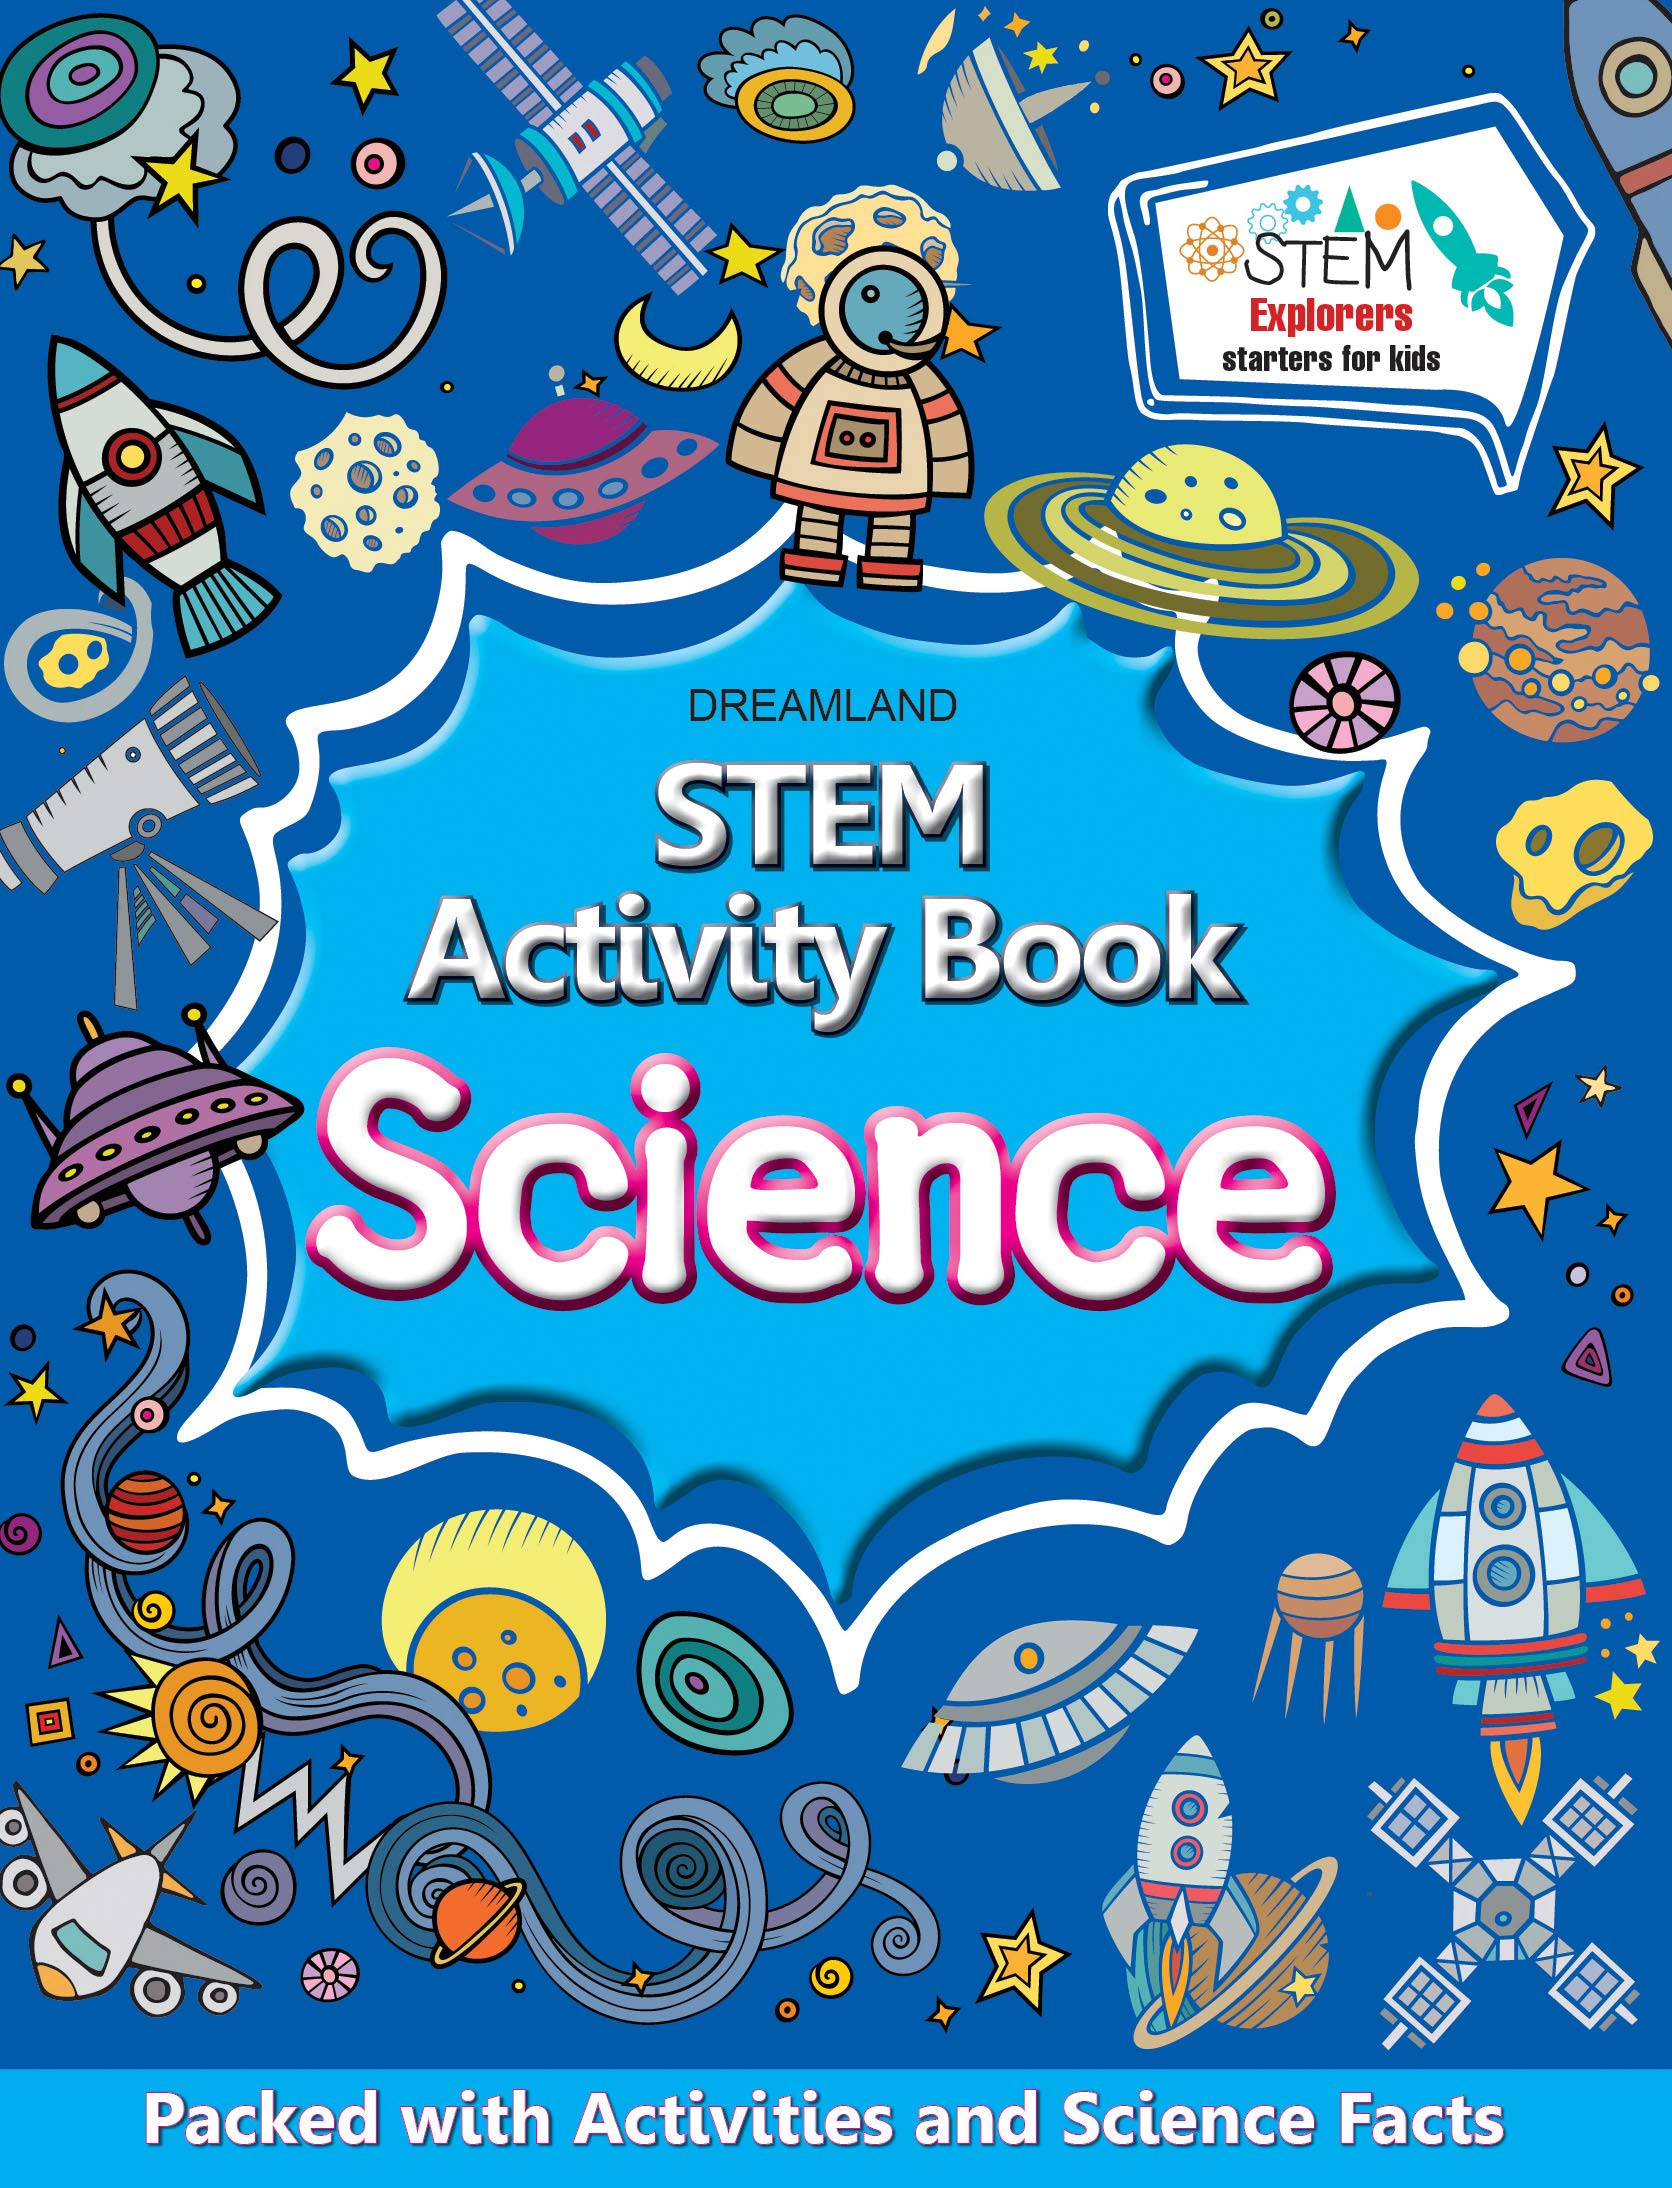 STEM Activity Book - Science | Packed with activities and Science Facts